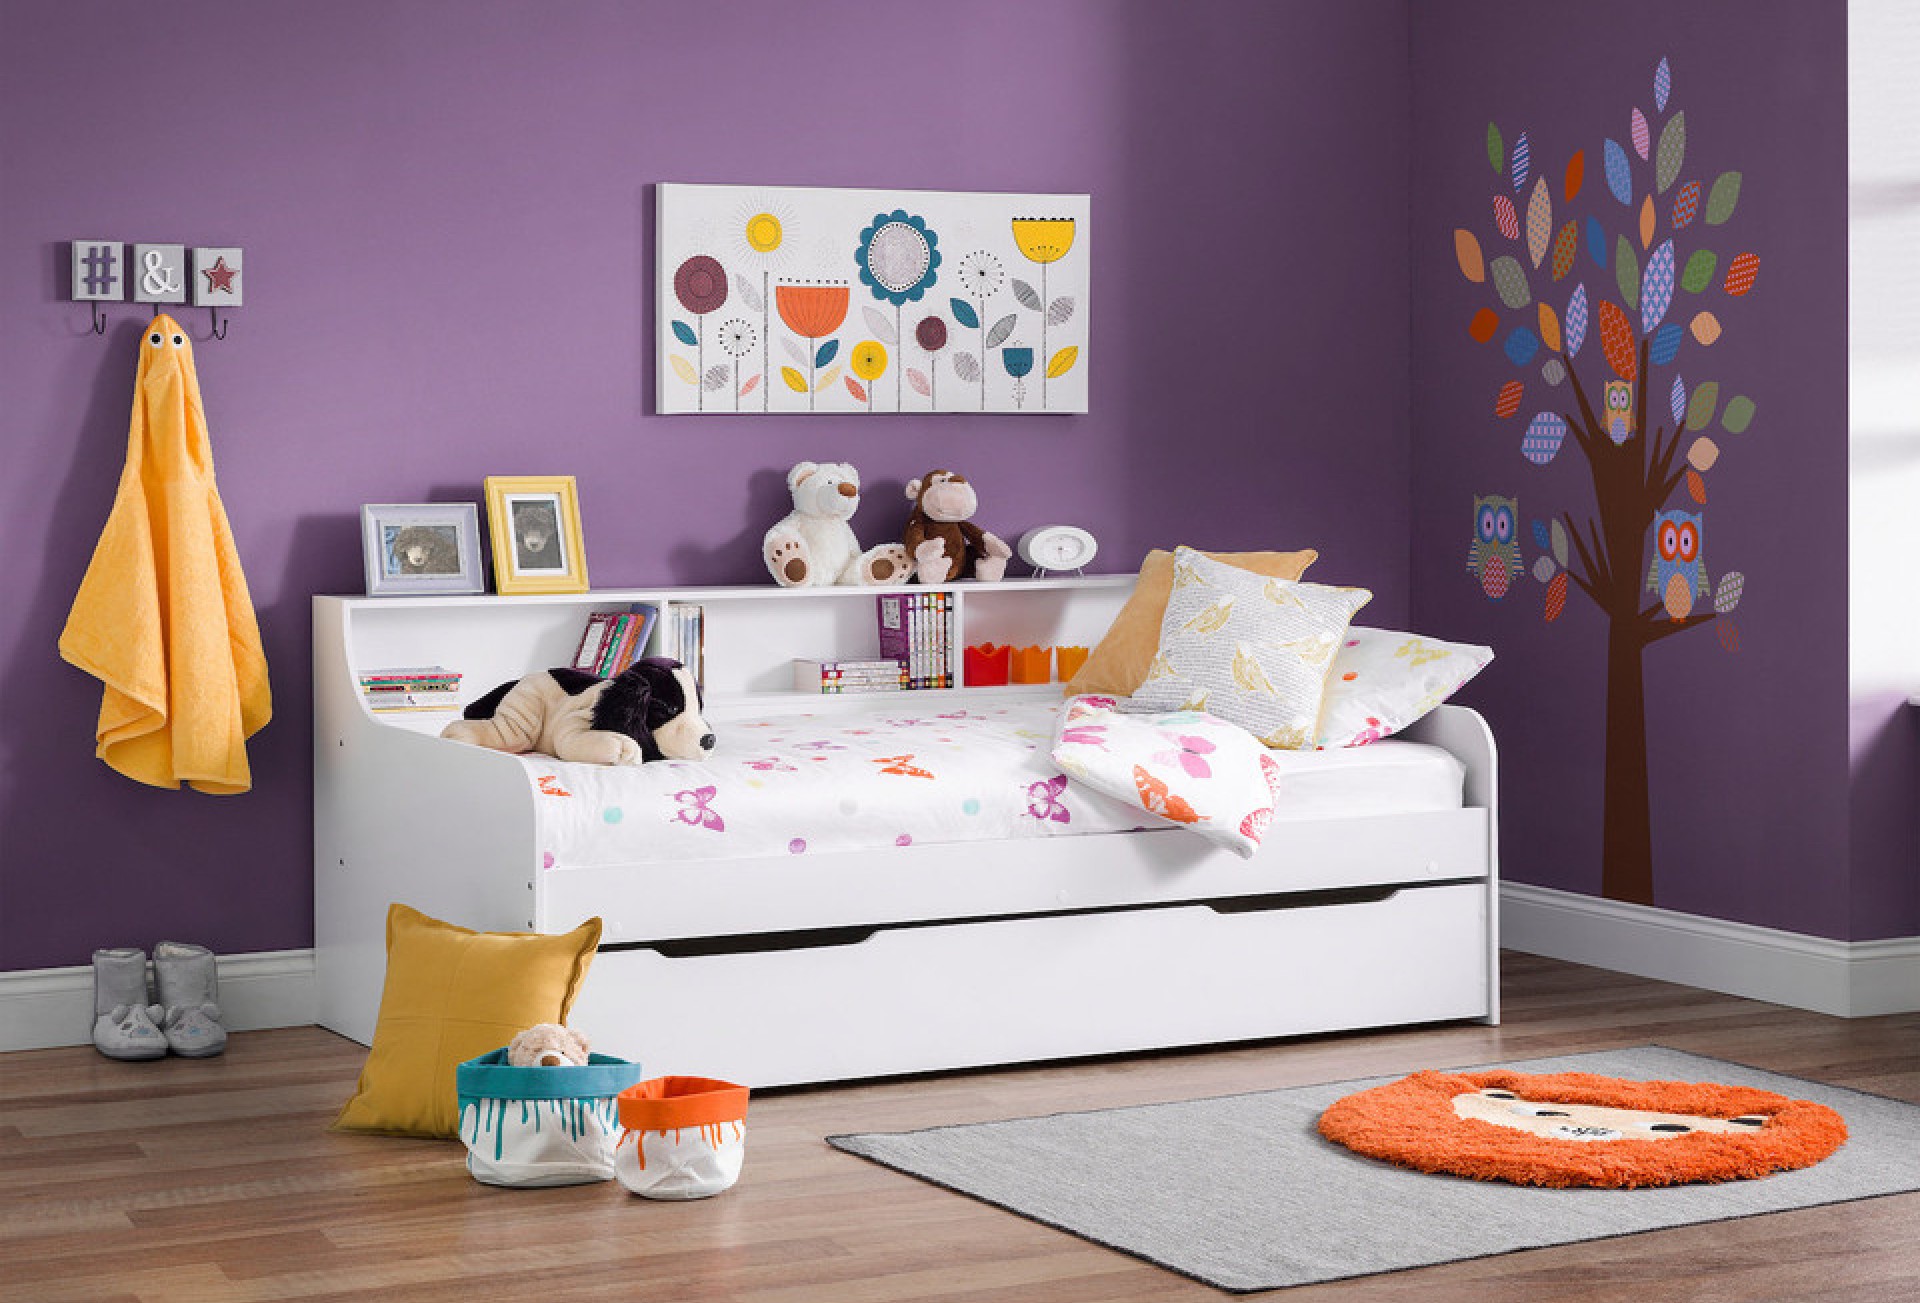 Harlow white day bed set against a purple wall in a nursery, children's bedroom or playroom